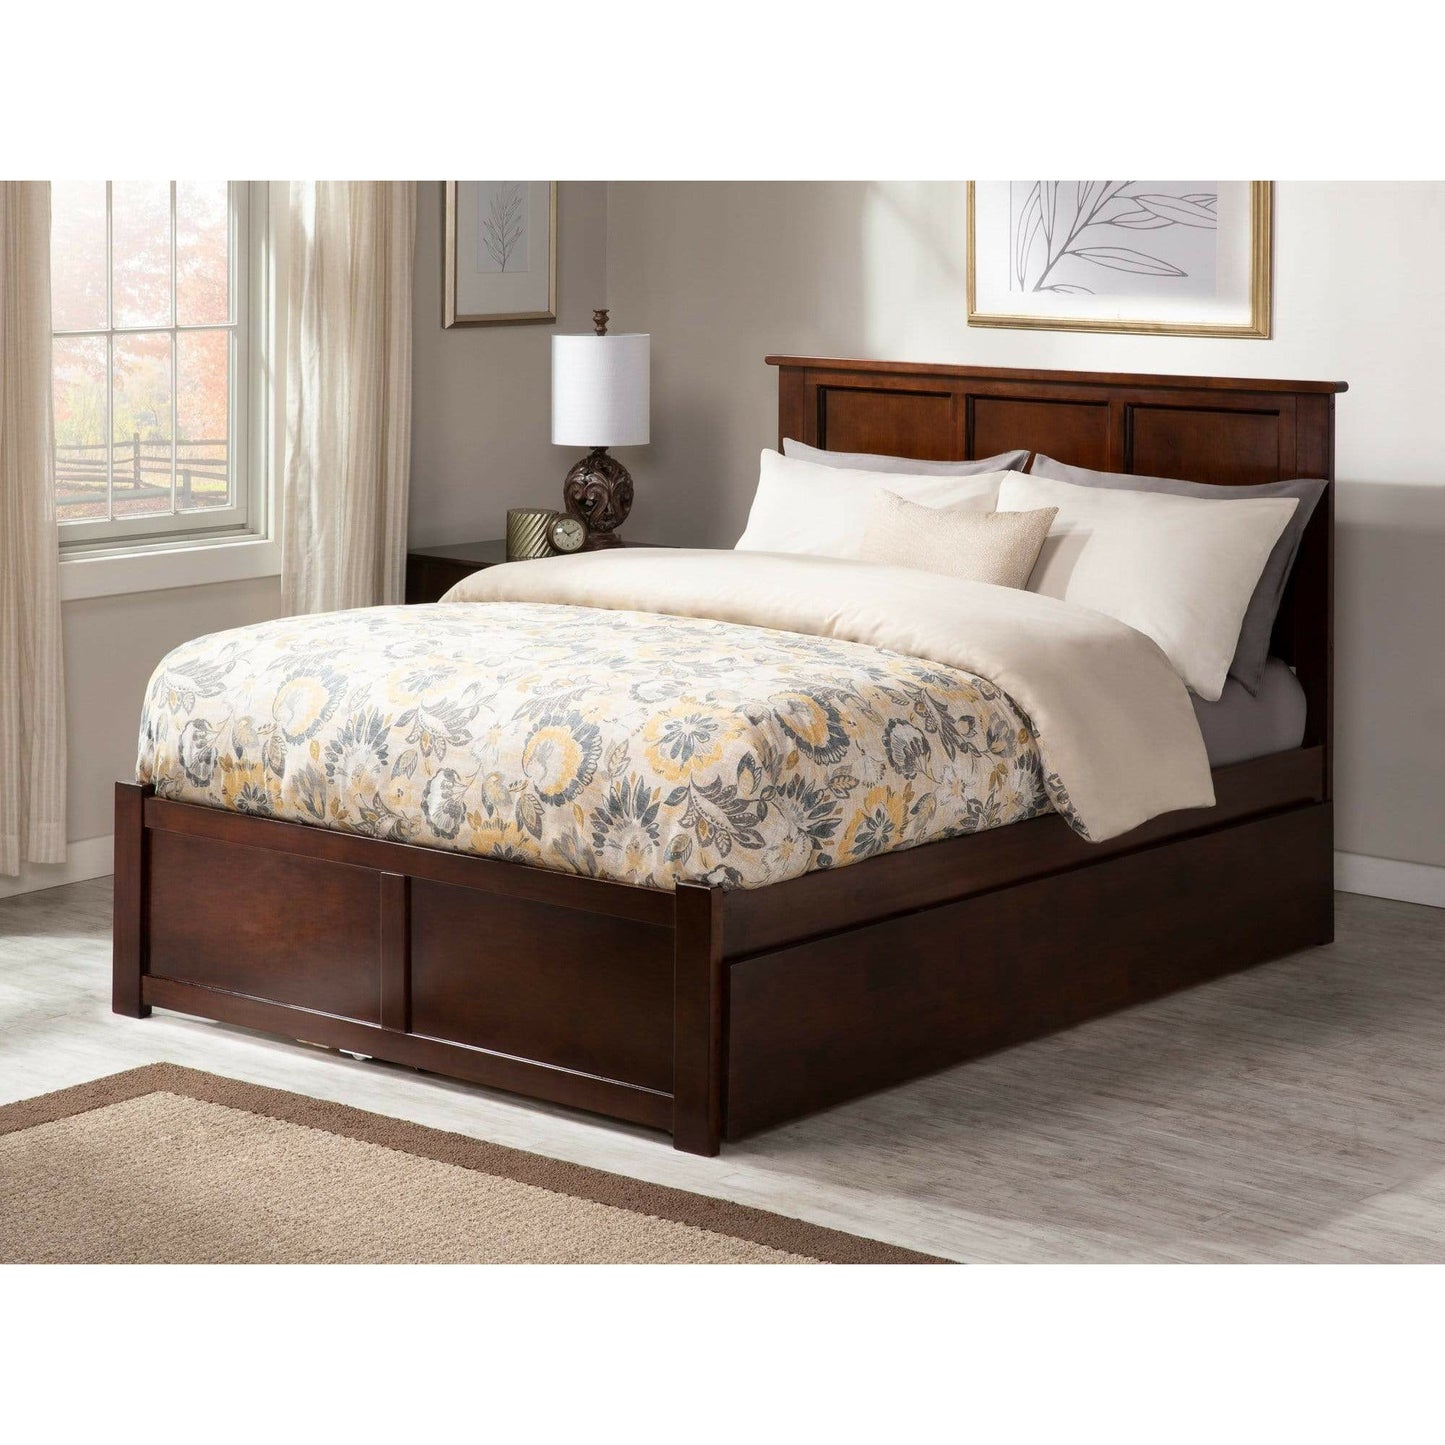 Atlantic Furniture Bed Walnut Madison Full Platform Bed with Matching Foot Board with Full Size Urban Trundle Bed in Espresso